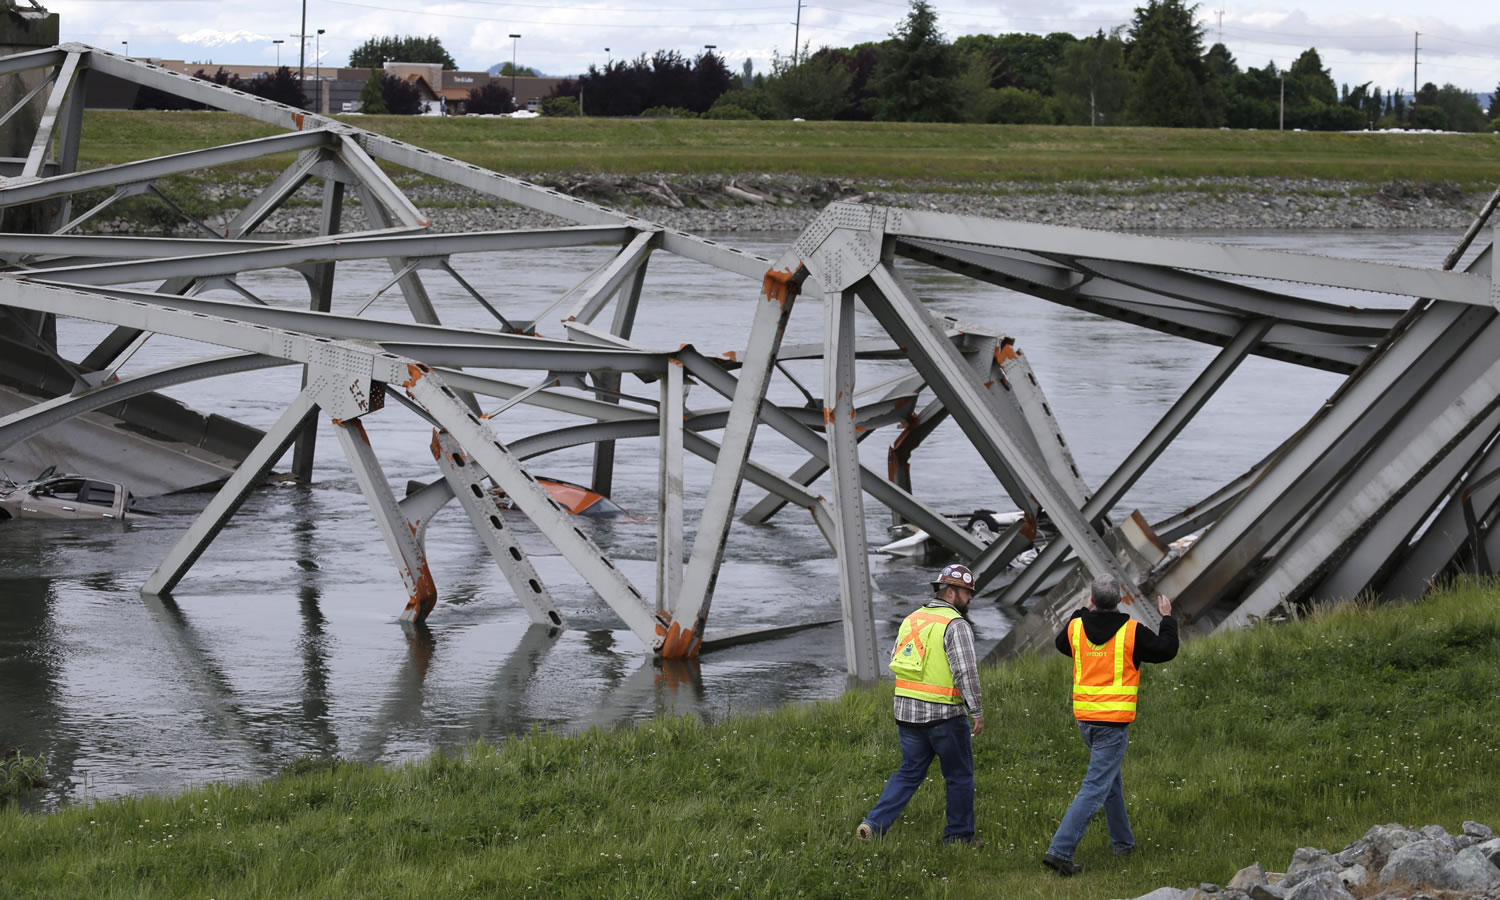 A truck carrying an oversize load struck the four-lane Interstate 5 bridge over the Skagit River on May 24, 2013.